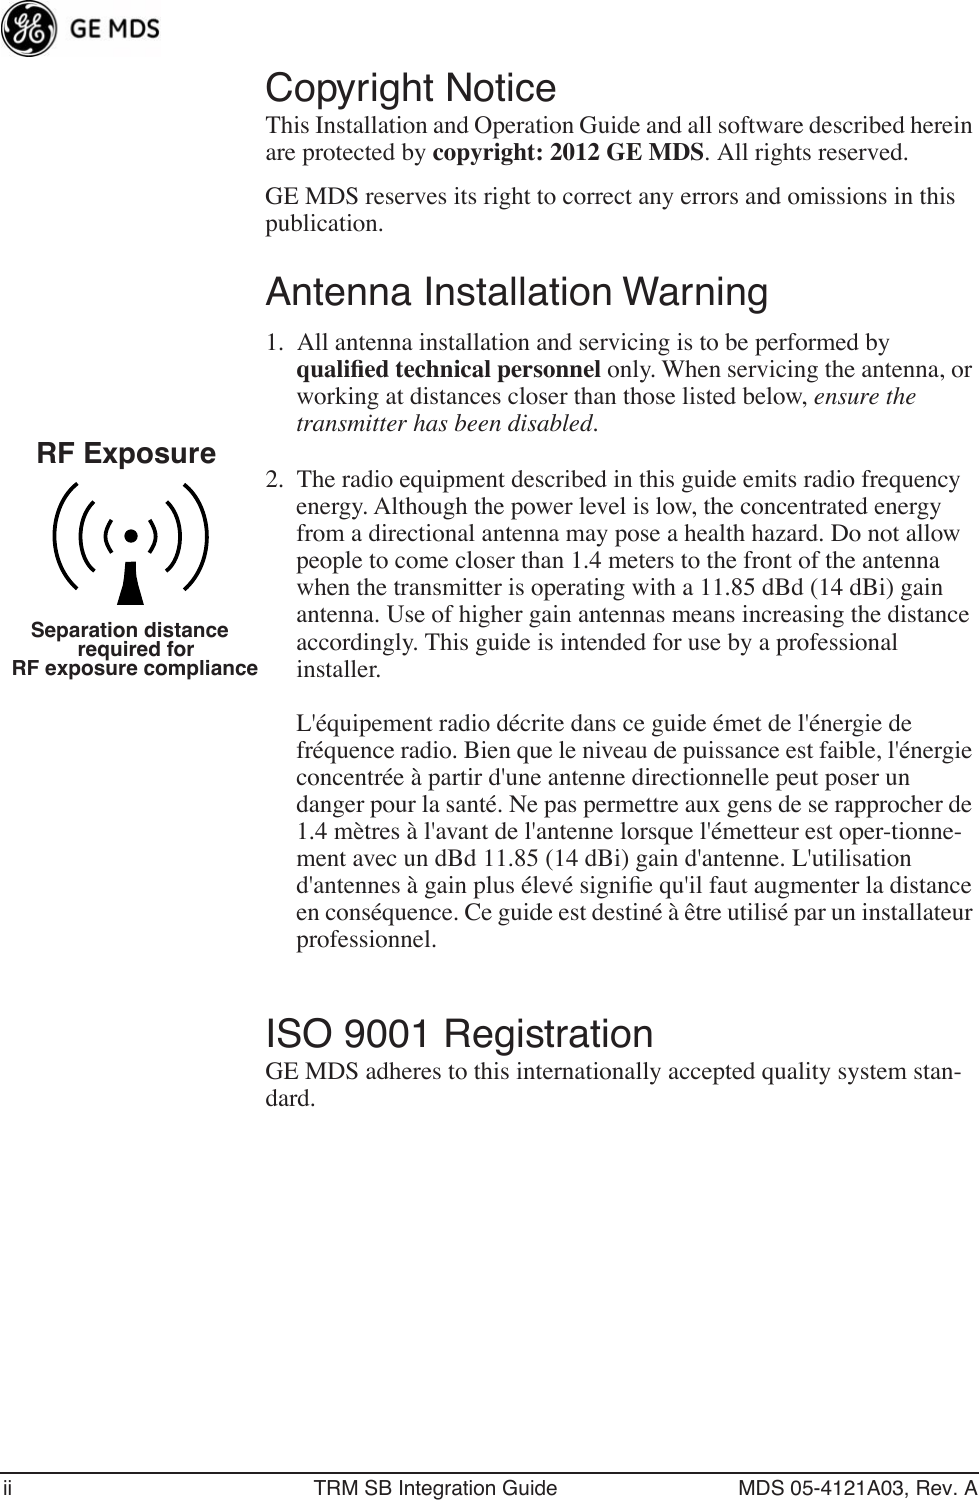  ii TRM SB Integration Guide MDS 05-4121A03, Rev. A Copyright Notice This Installation and Operation Guide and all software described herein are protected by  copyright: 2012 GE MDS .   All rights reserved.GE MDS reserves its right to correct any errors and omissions in this publication. Antenna Installation Warning 1. All antenna installation and servicing is to be performed by  qualiﬁed technical personnel  only. When servicing the antenna, or working at distances closer than those listed below,  ensure the transmitter has been disabled. 2. The radio equipment described in this guide emits radio frequency energy. Although the power level is low, the concentrated energy from a directional antenna may pose a health hazard. Do not allow people to come closer than 1.4 meters to the front of the antenna when the transmitter is operating with a 11.85 dBd (14 dBi) gain antenna. Use of higher gain antennas means increasing the distance accordingly. This guide is intended for use by a professional installer.L&apos;équipement radio décrite dans ce guide émet de l&apos;énergie de fréquence radio. Bien que le niveau de puissance est faible, l&apos;énergie concentrée à partir d&apos;une antenne directionnelle peut poser un danger pour la santé. Ne pas permettre aux gens de se rapprocher de 1.4 mètres à l&apos;avant de l&apos;antenne lorsque l&apos;émetteur est oper-tionne-ment avec un dBd 11.85 (14 dBi) gain d&apos;antenne. L&apos;utilisation d&apos;antennes à gain plus élevé signiﬁe qu&apos;il faut augmenter la distance en conséquence. Ce guide est destiné à être utilisé par un installateur professionnel.  ISO 9001 Registration GE MDS adheres to this internationally accepted quality system stan-dard.RF ExposureSeparation distancerequired forRF exposure compliance